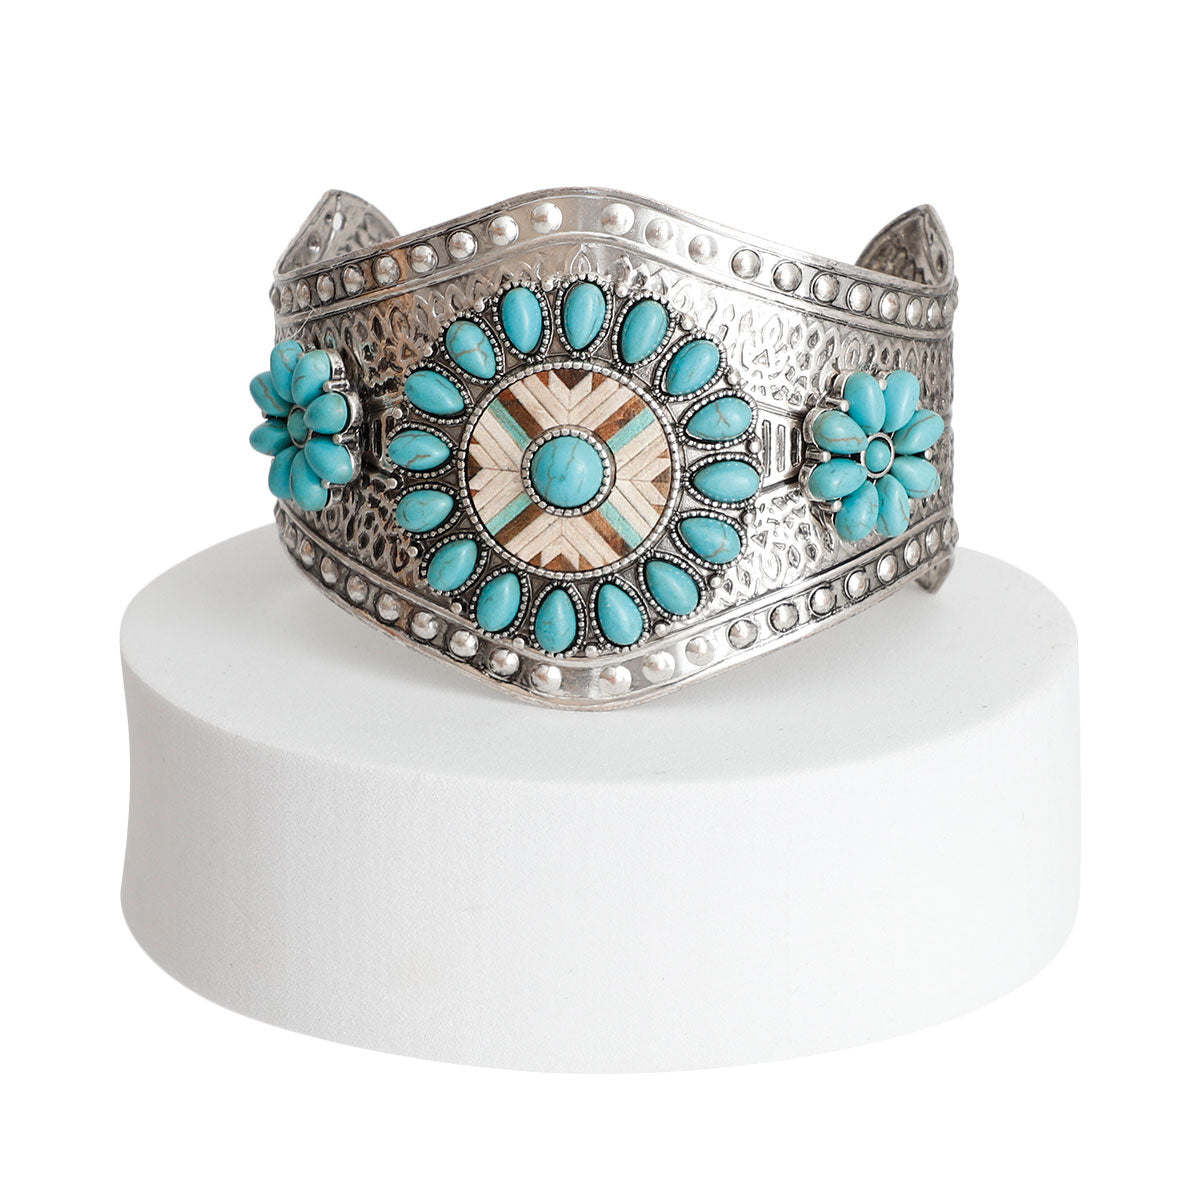 Western Turquoise Bead Engraved Cuff